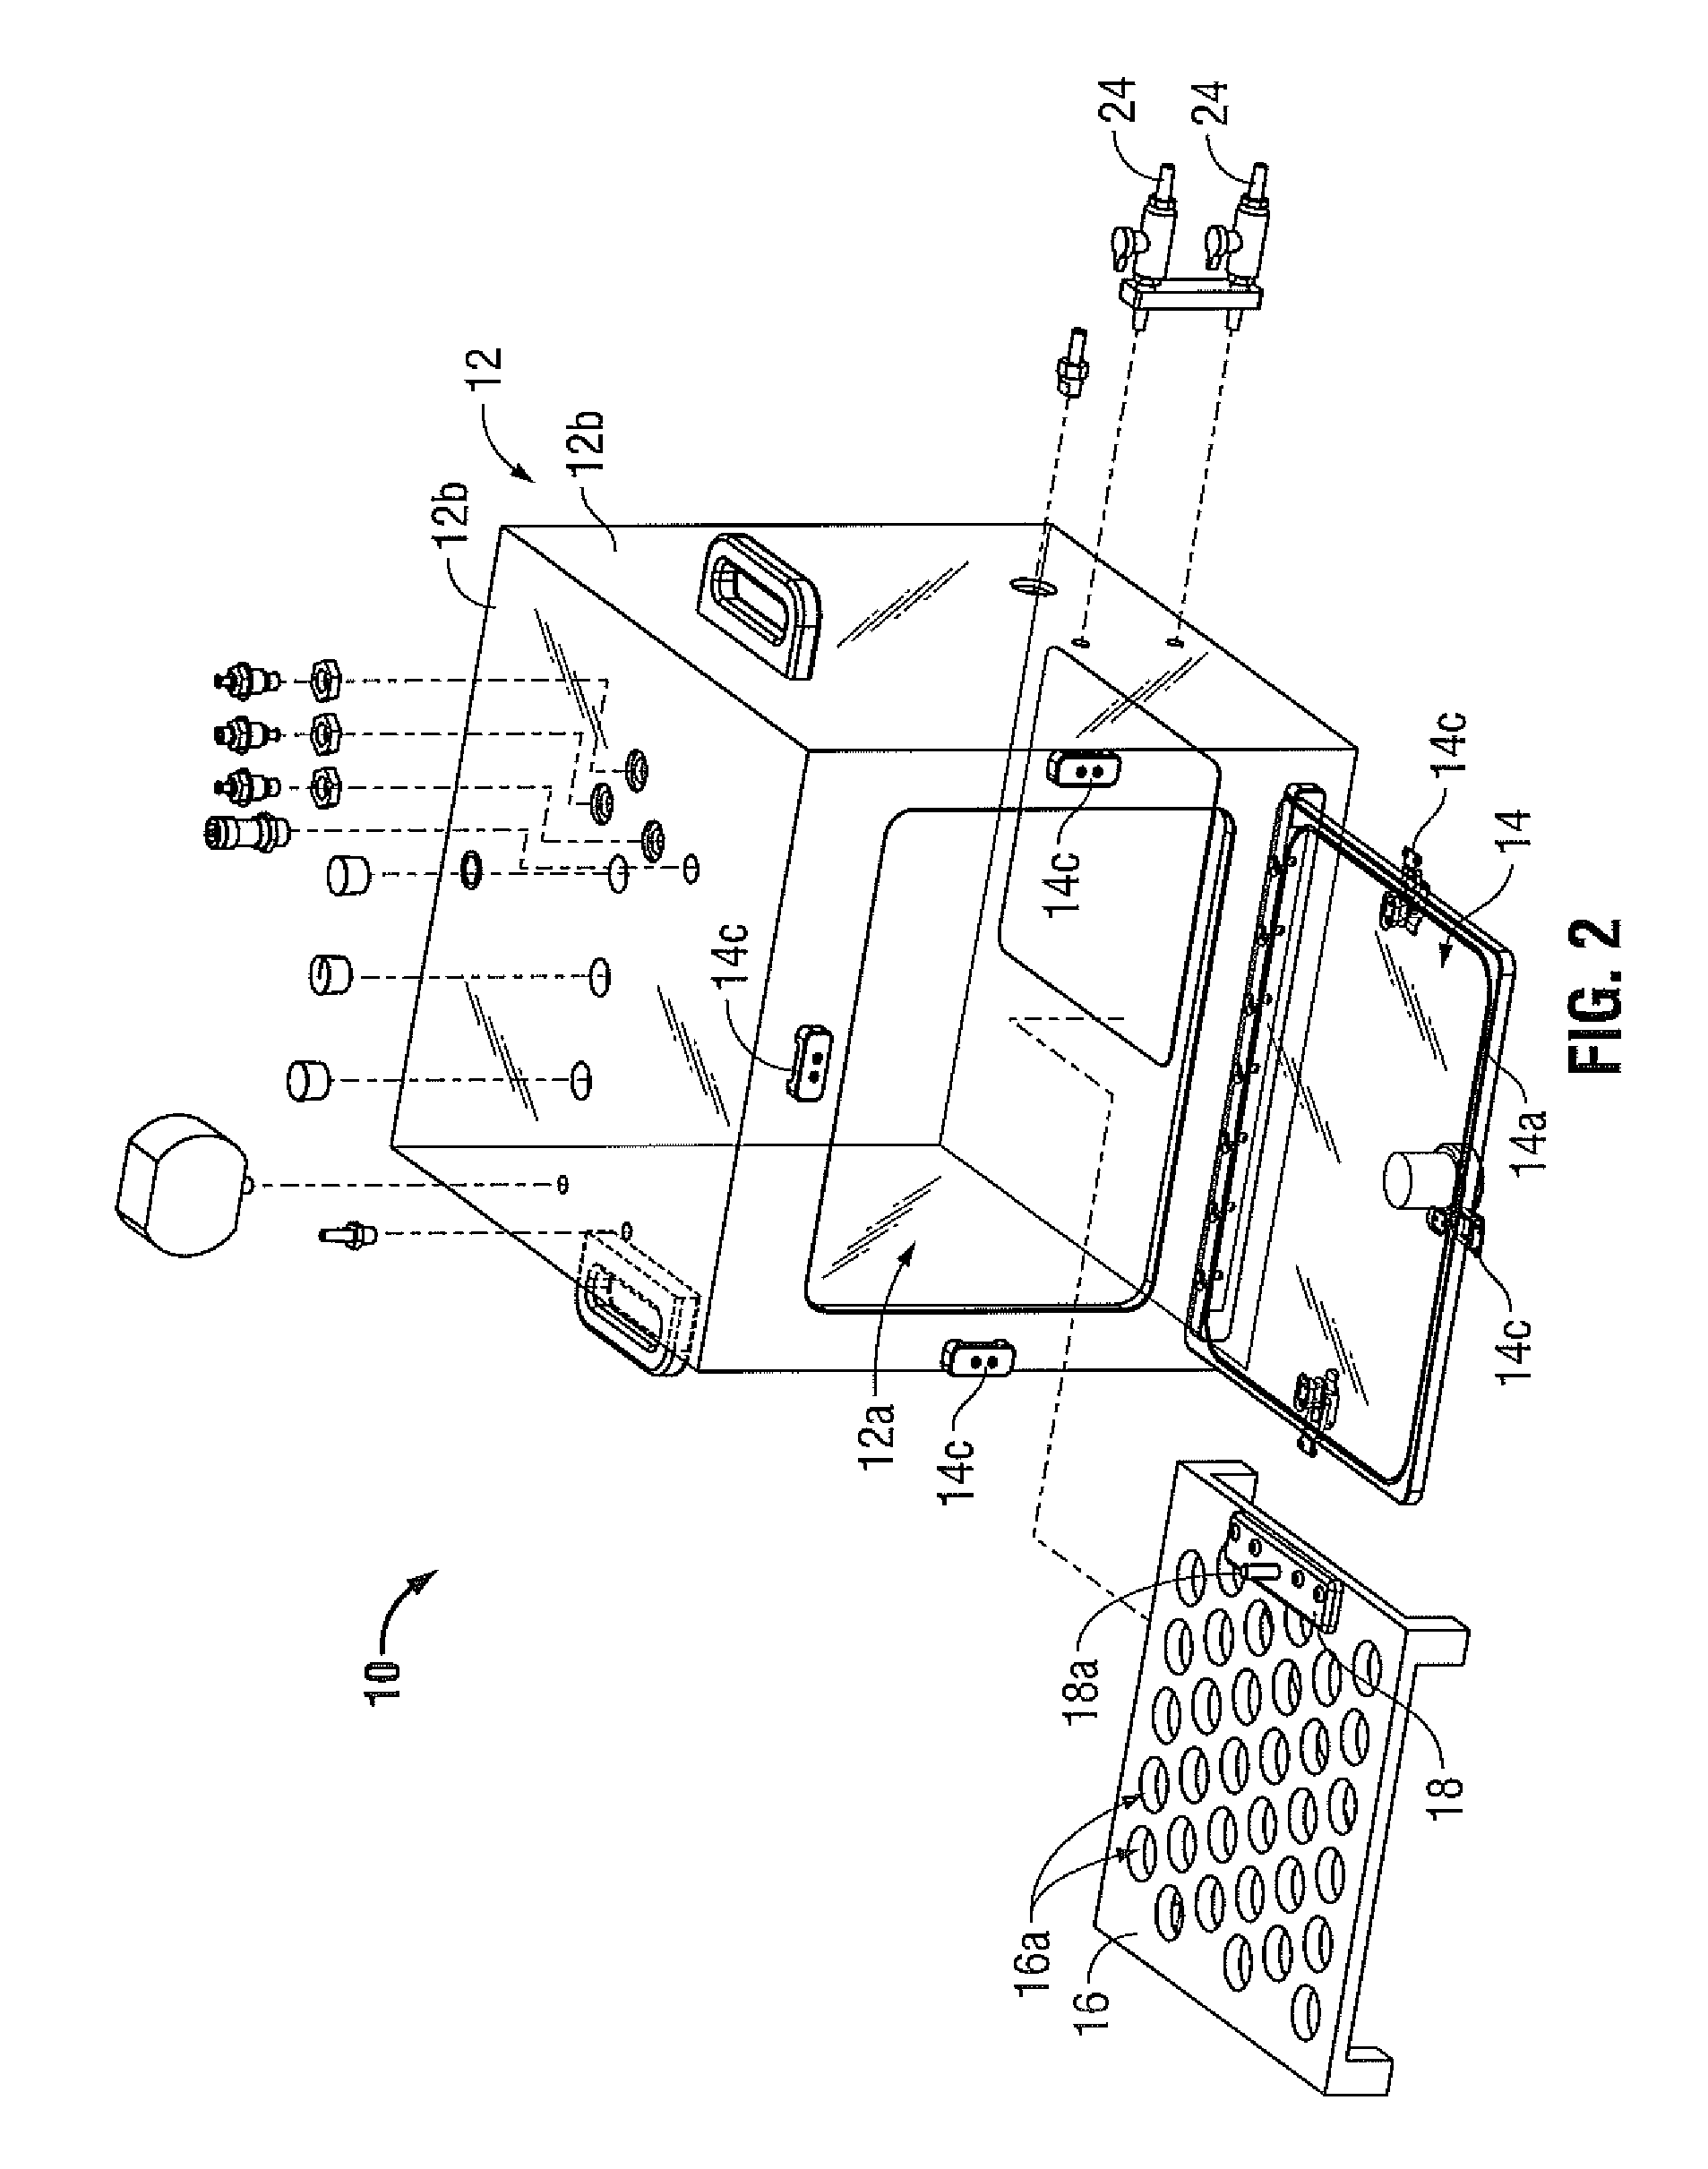 System and Method for an Ex Vivo Body Organ Electrosurgical Research Device